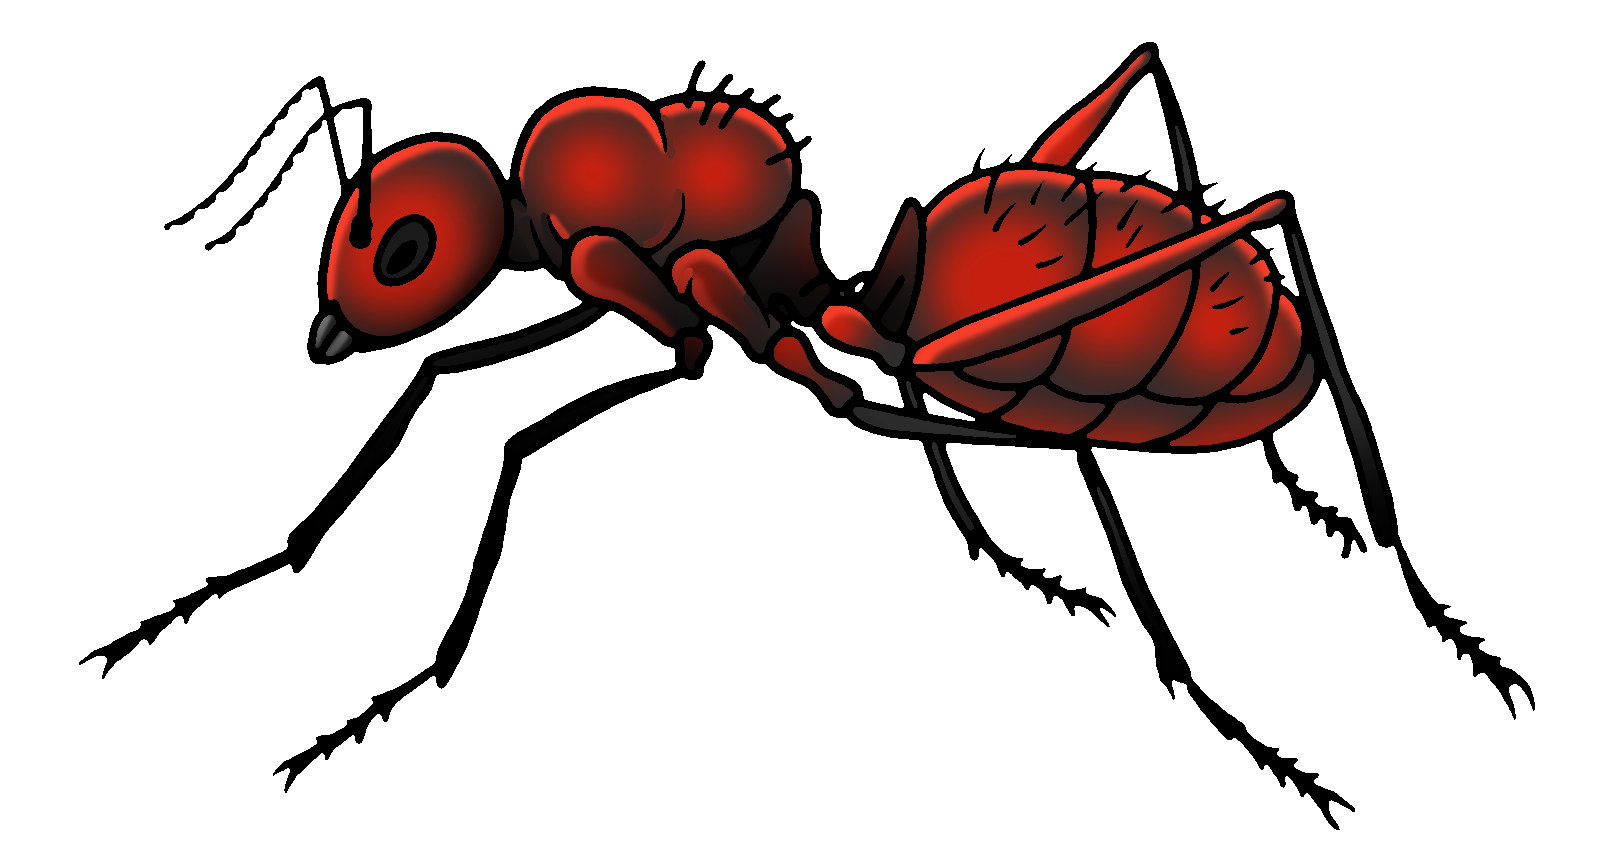 Ant drawing clipart illustration